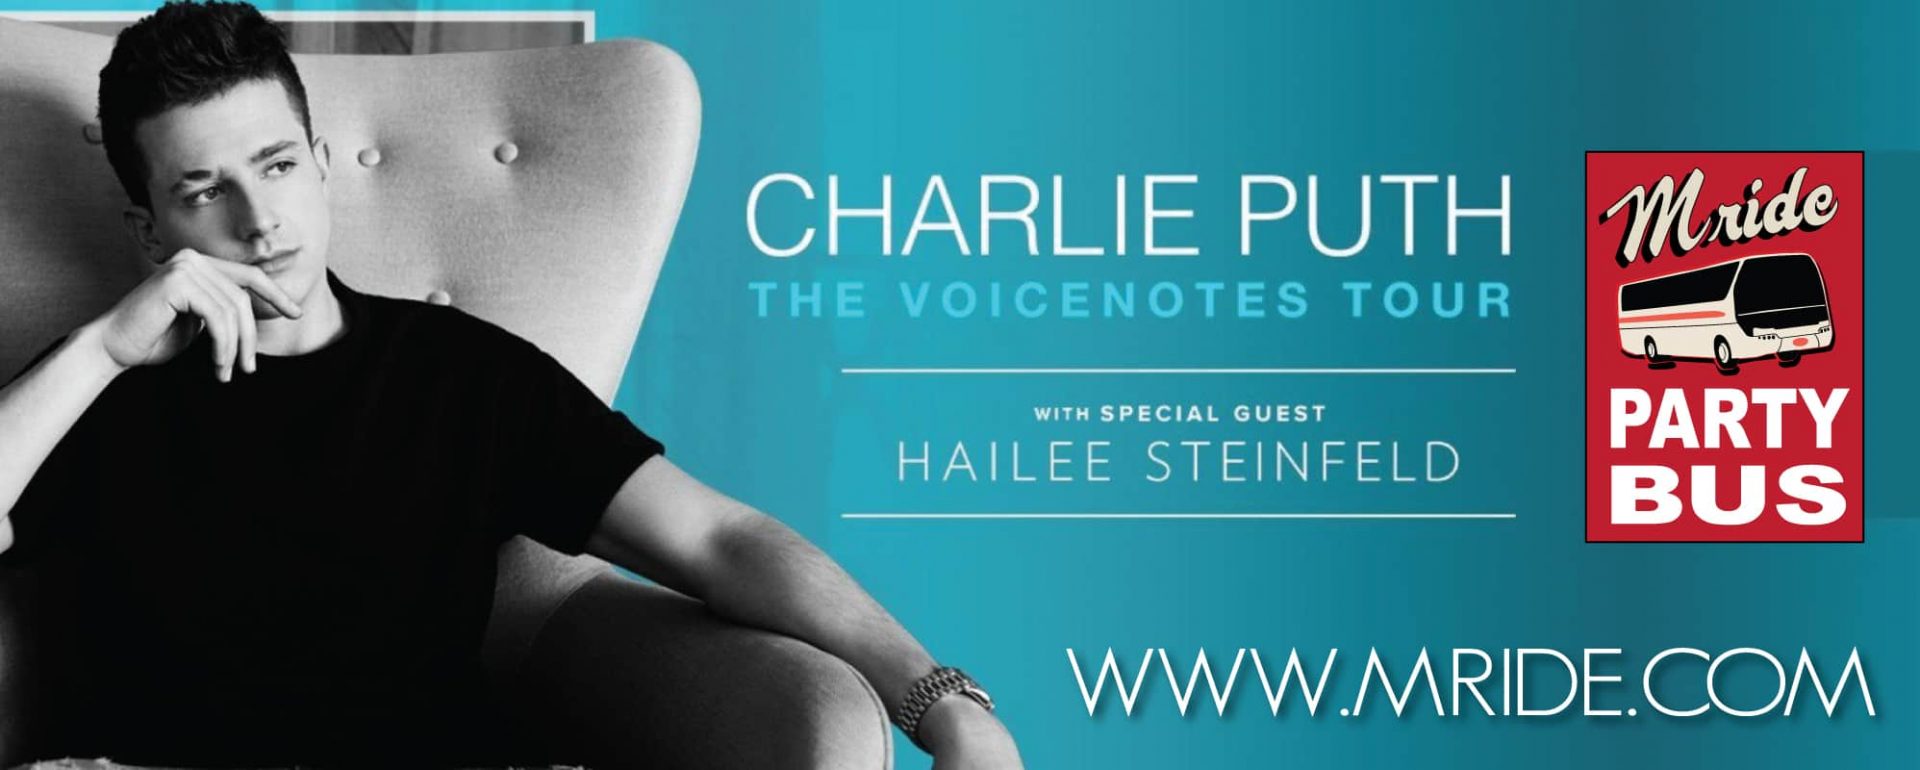 Charlie Puth The Voicenotes Tour